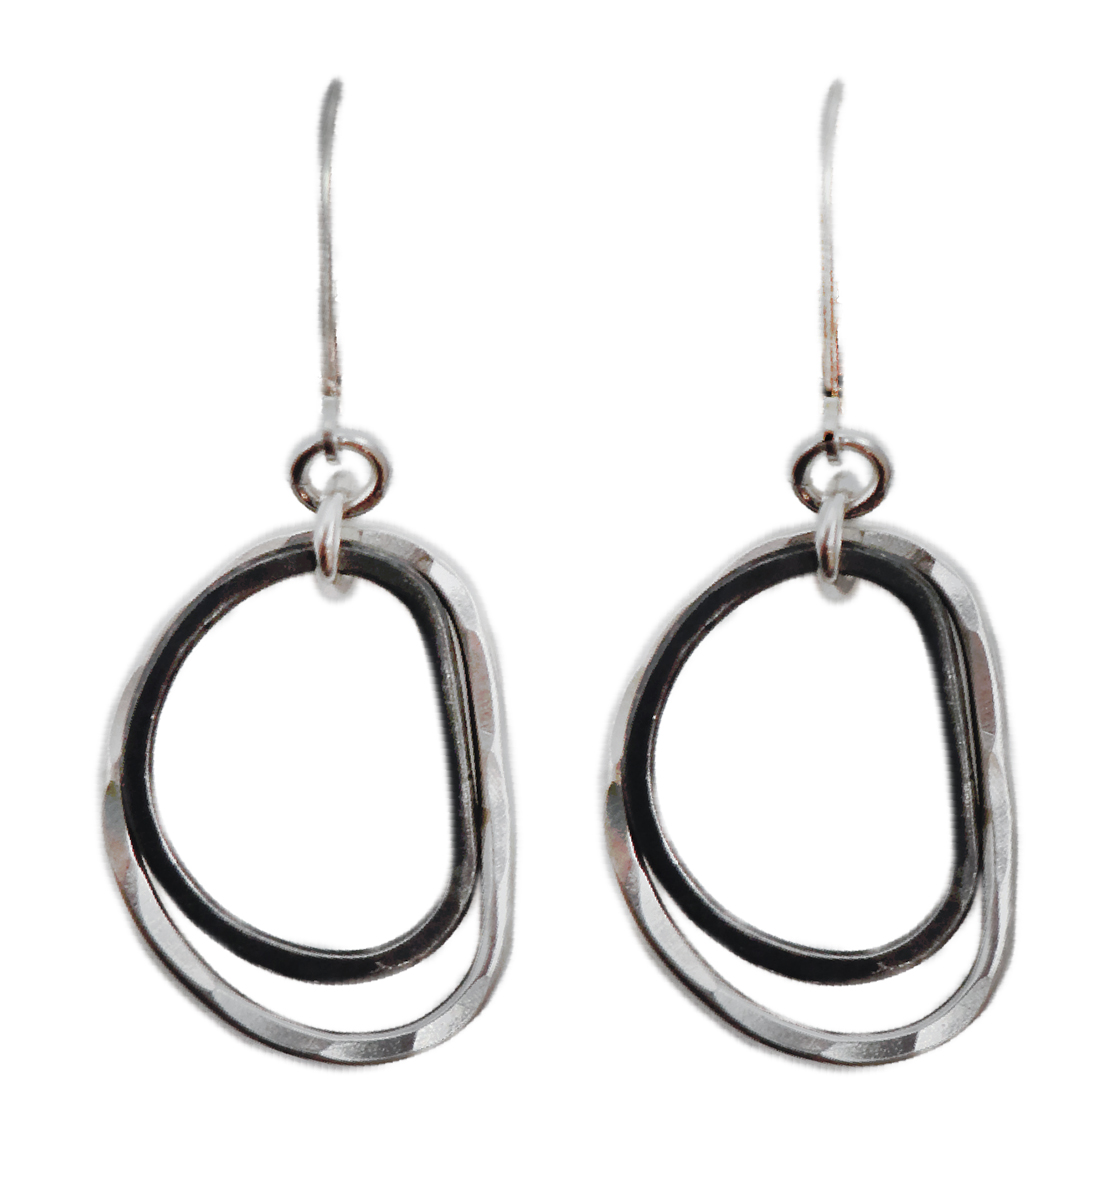 JESSICA AND IAN GIBSON - STERLING AND OXIDIZED DOUBLE HOOP EARRINGS - SILVER & GOLD